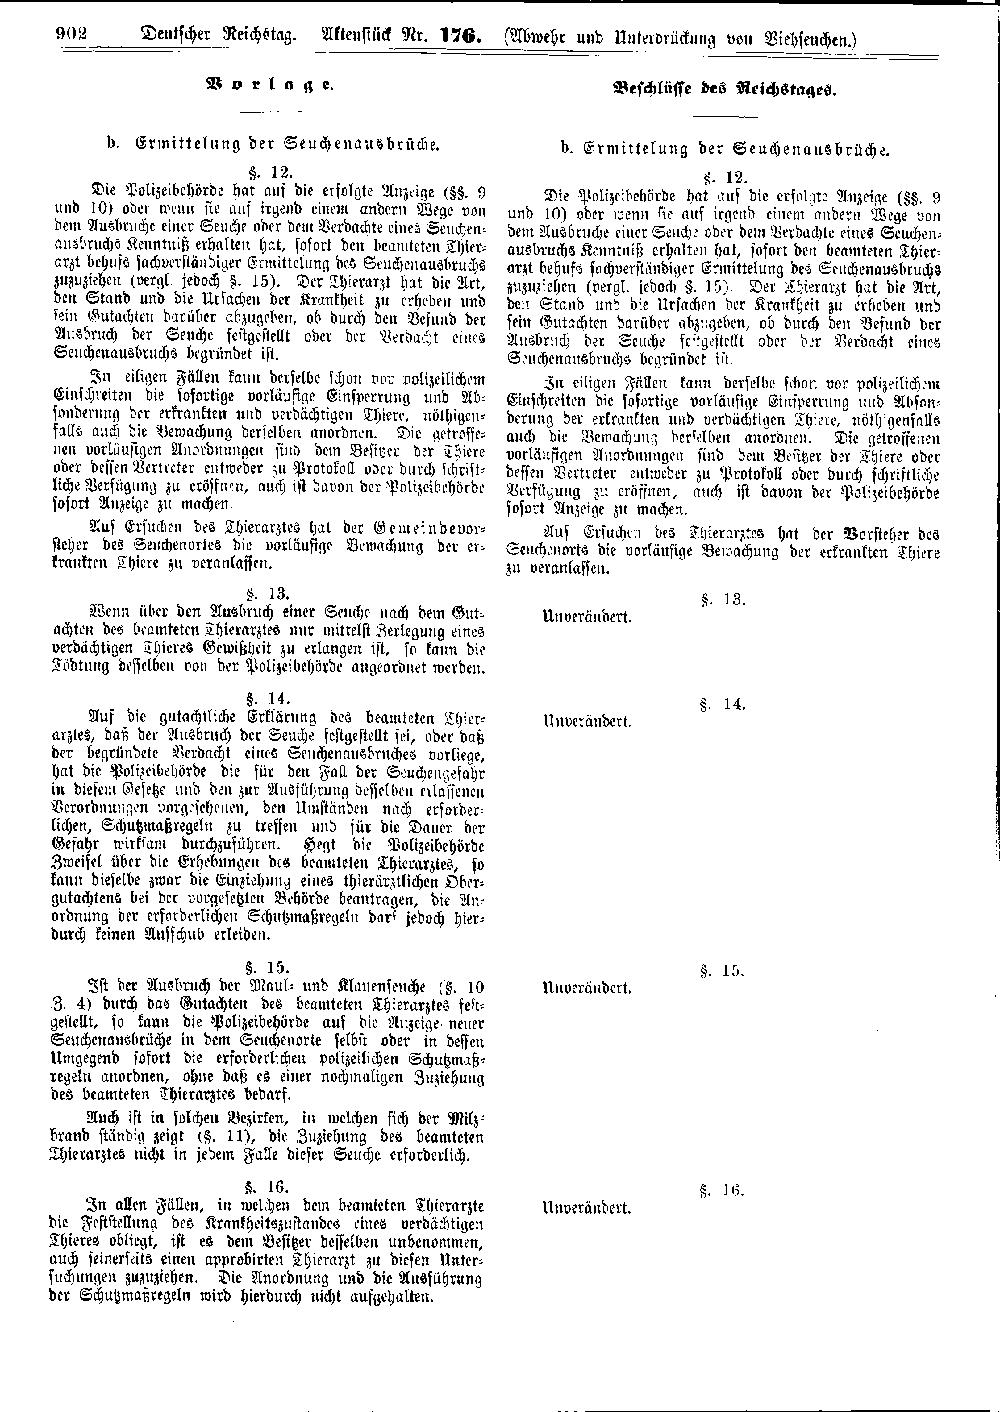 Scan of page 902